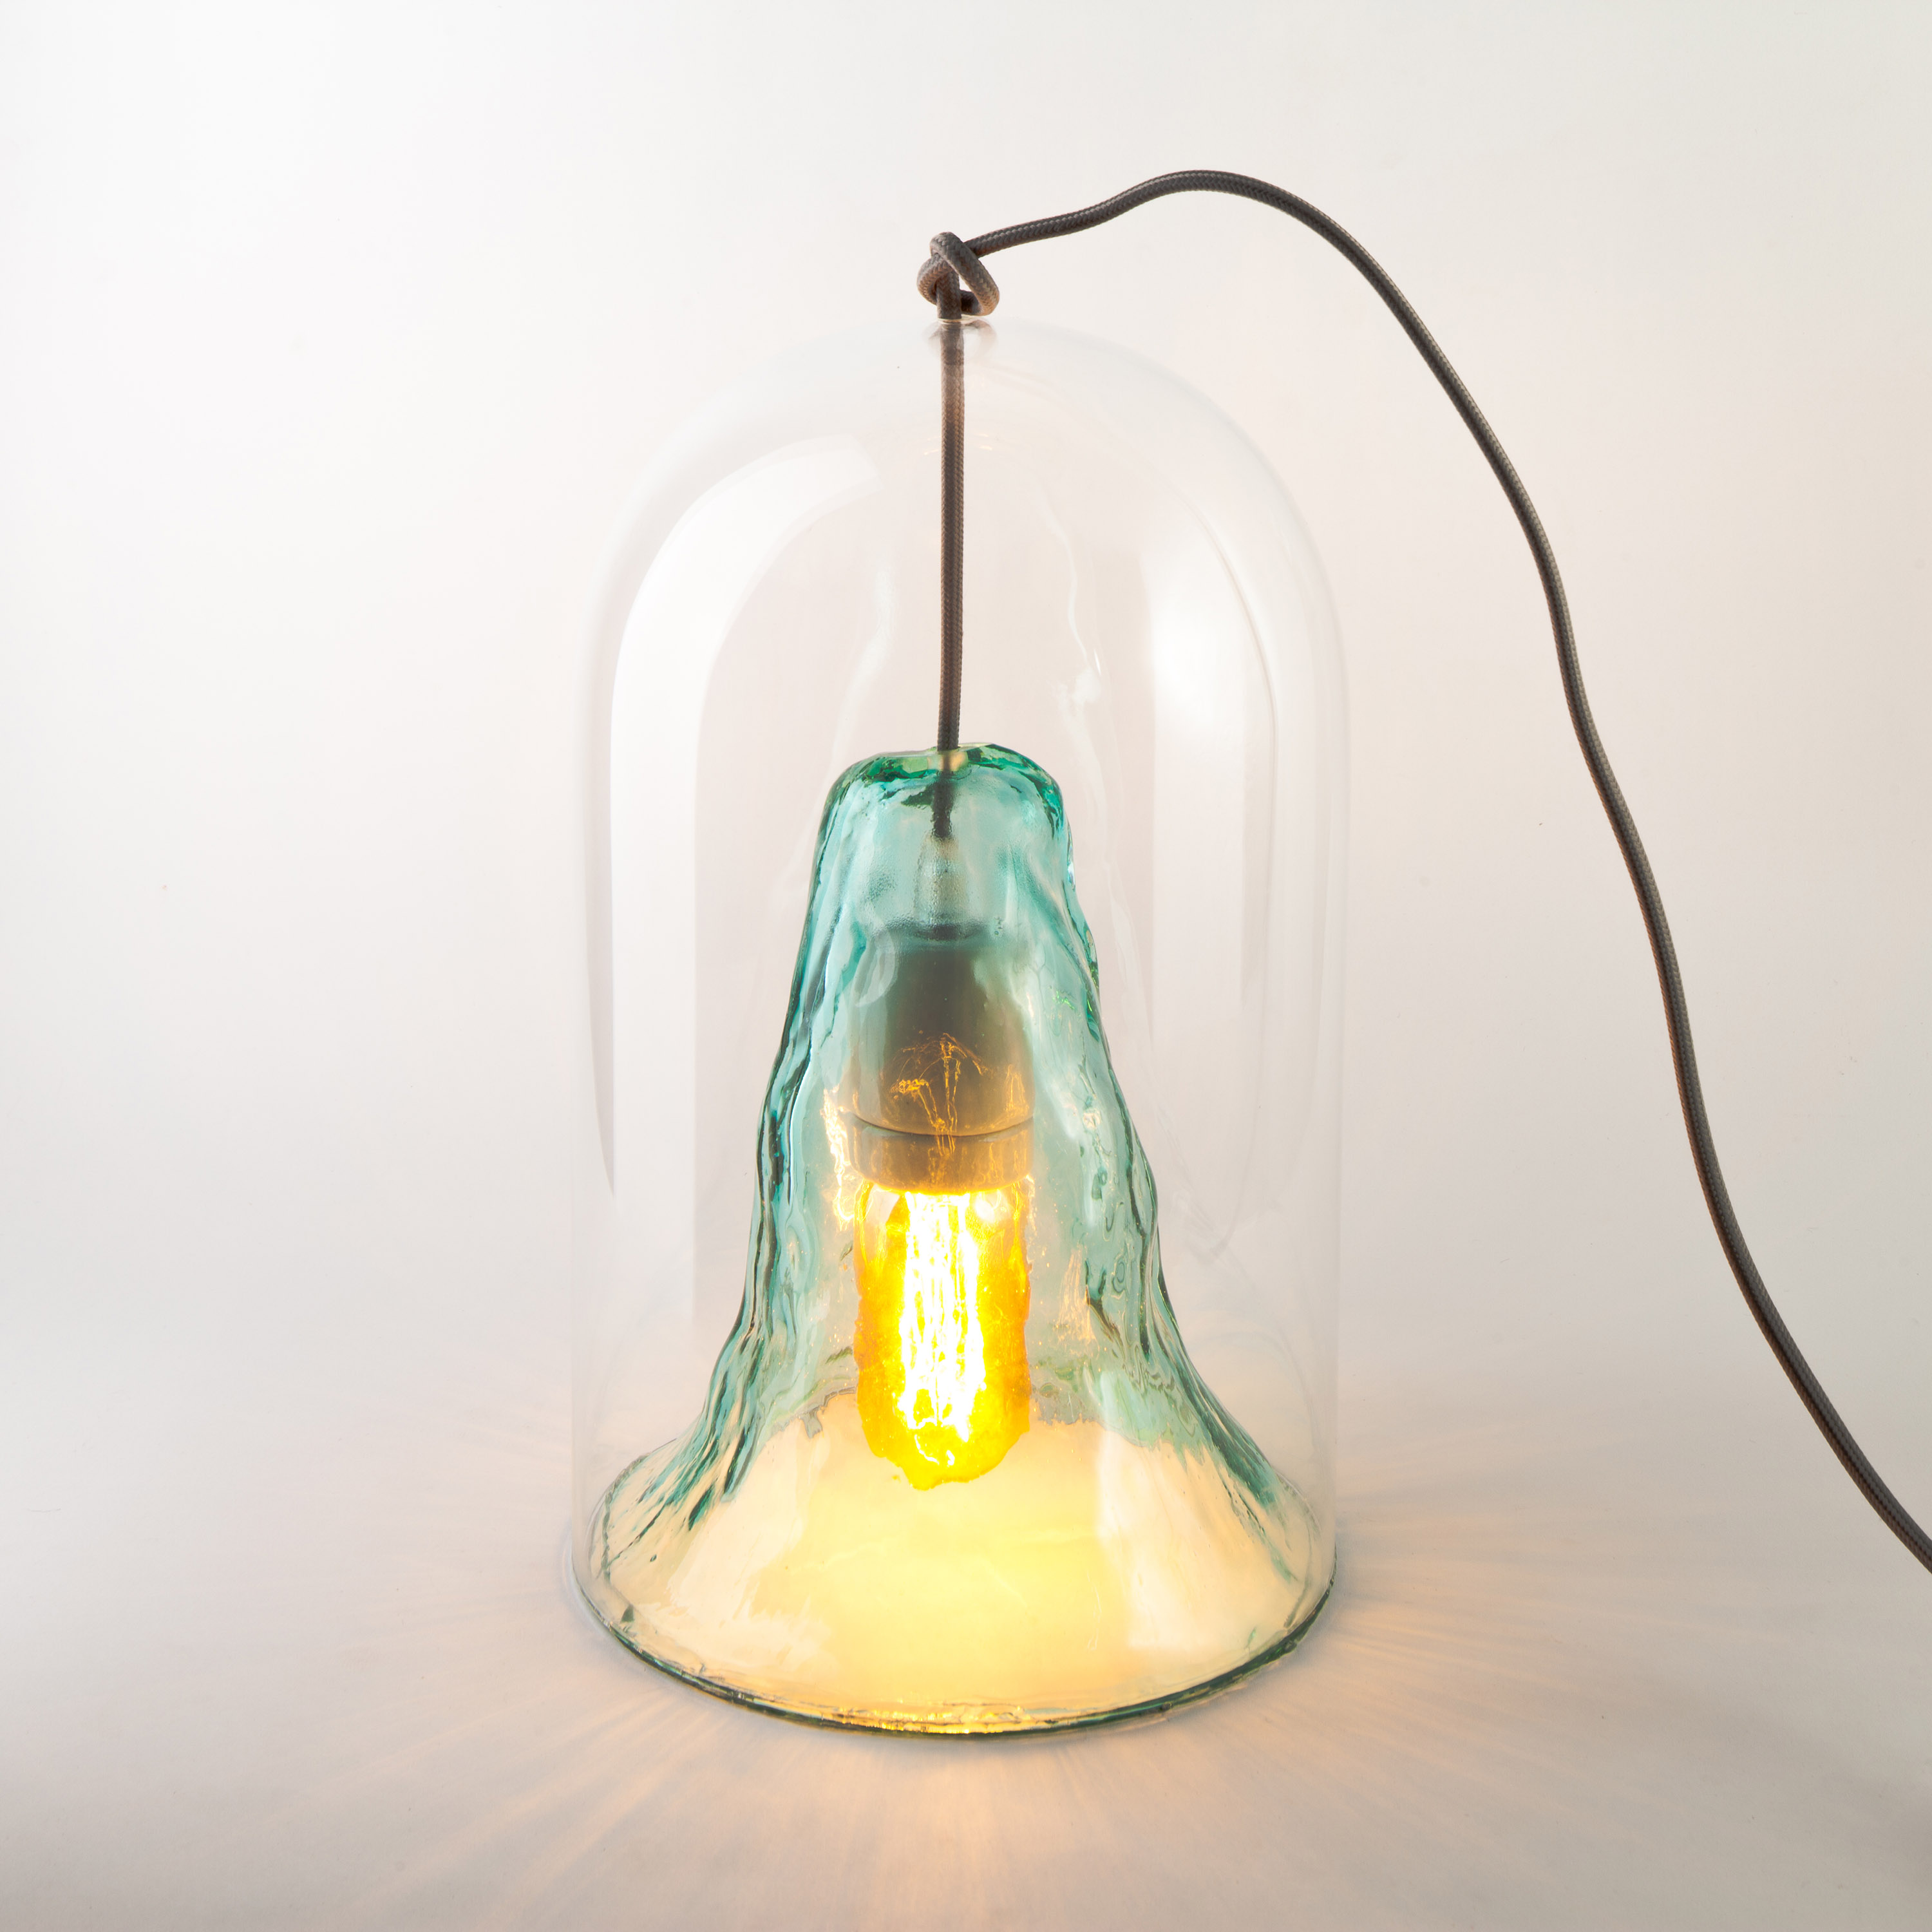 Pico Lamp by André Teoman